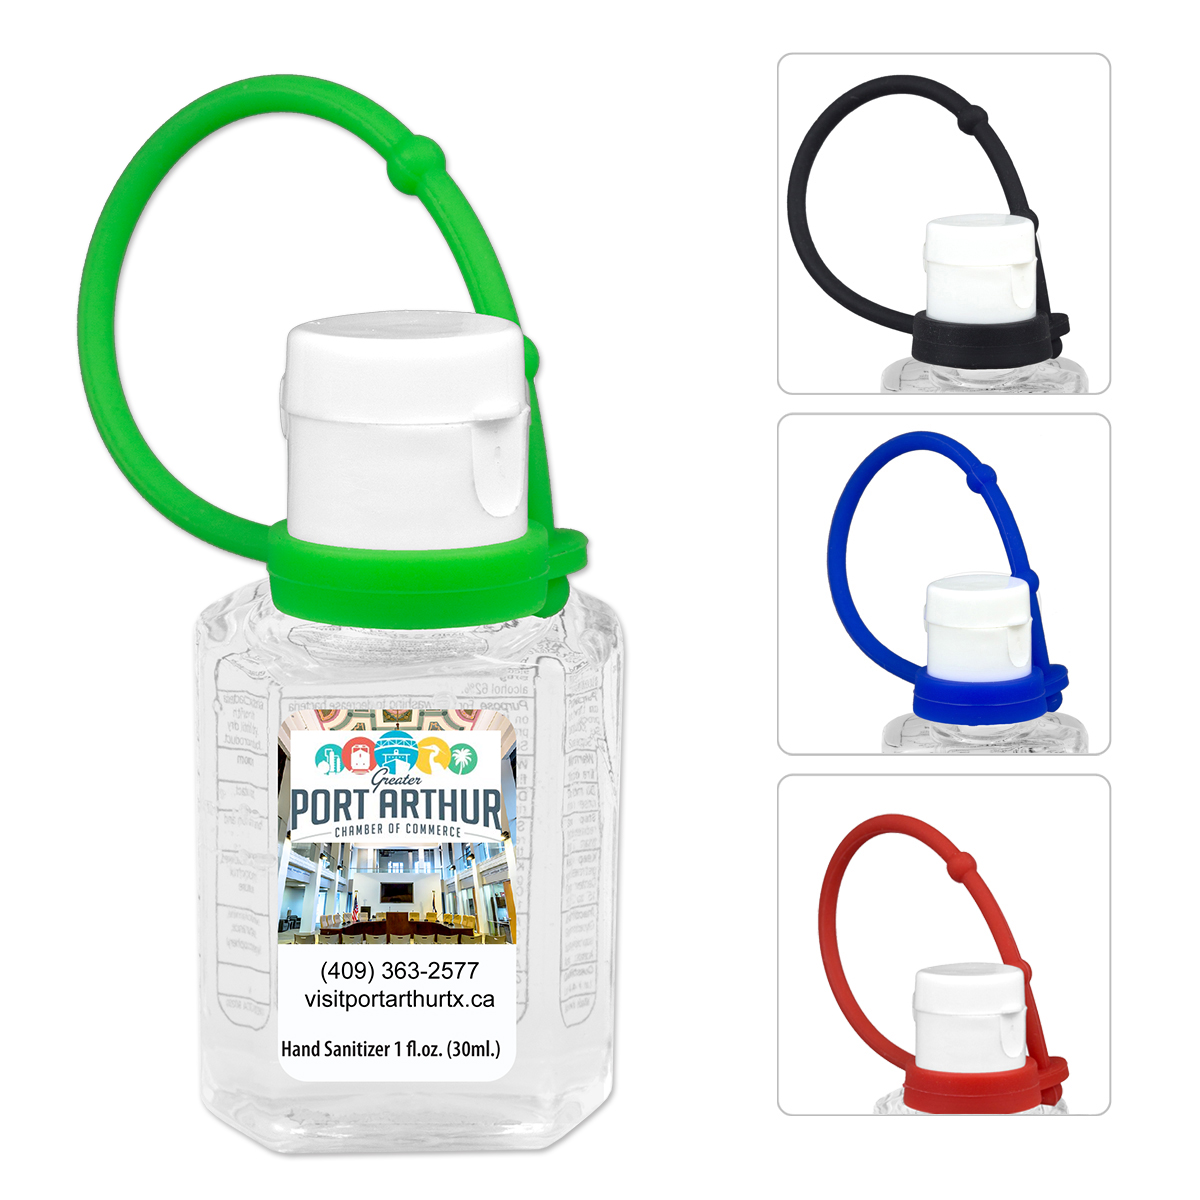 "SanPal Connect" 1.0 oz Compact Hand Sanitizer Antibacterial Gel in Flip-Top Squeeze Bottle with Colorful Silicone Leash